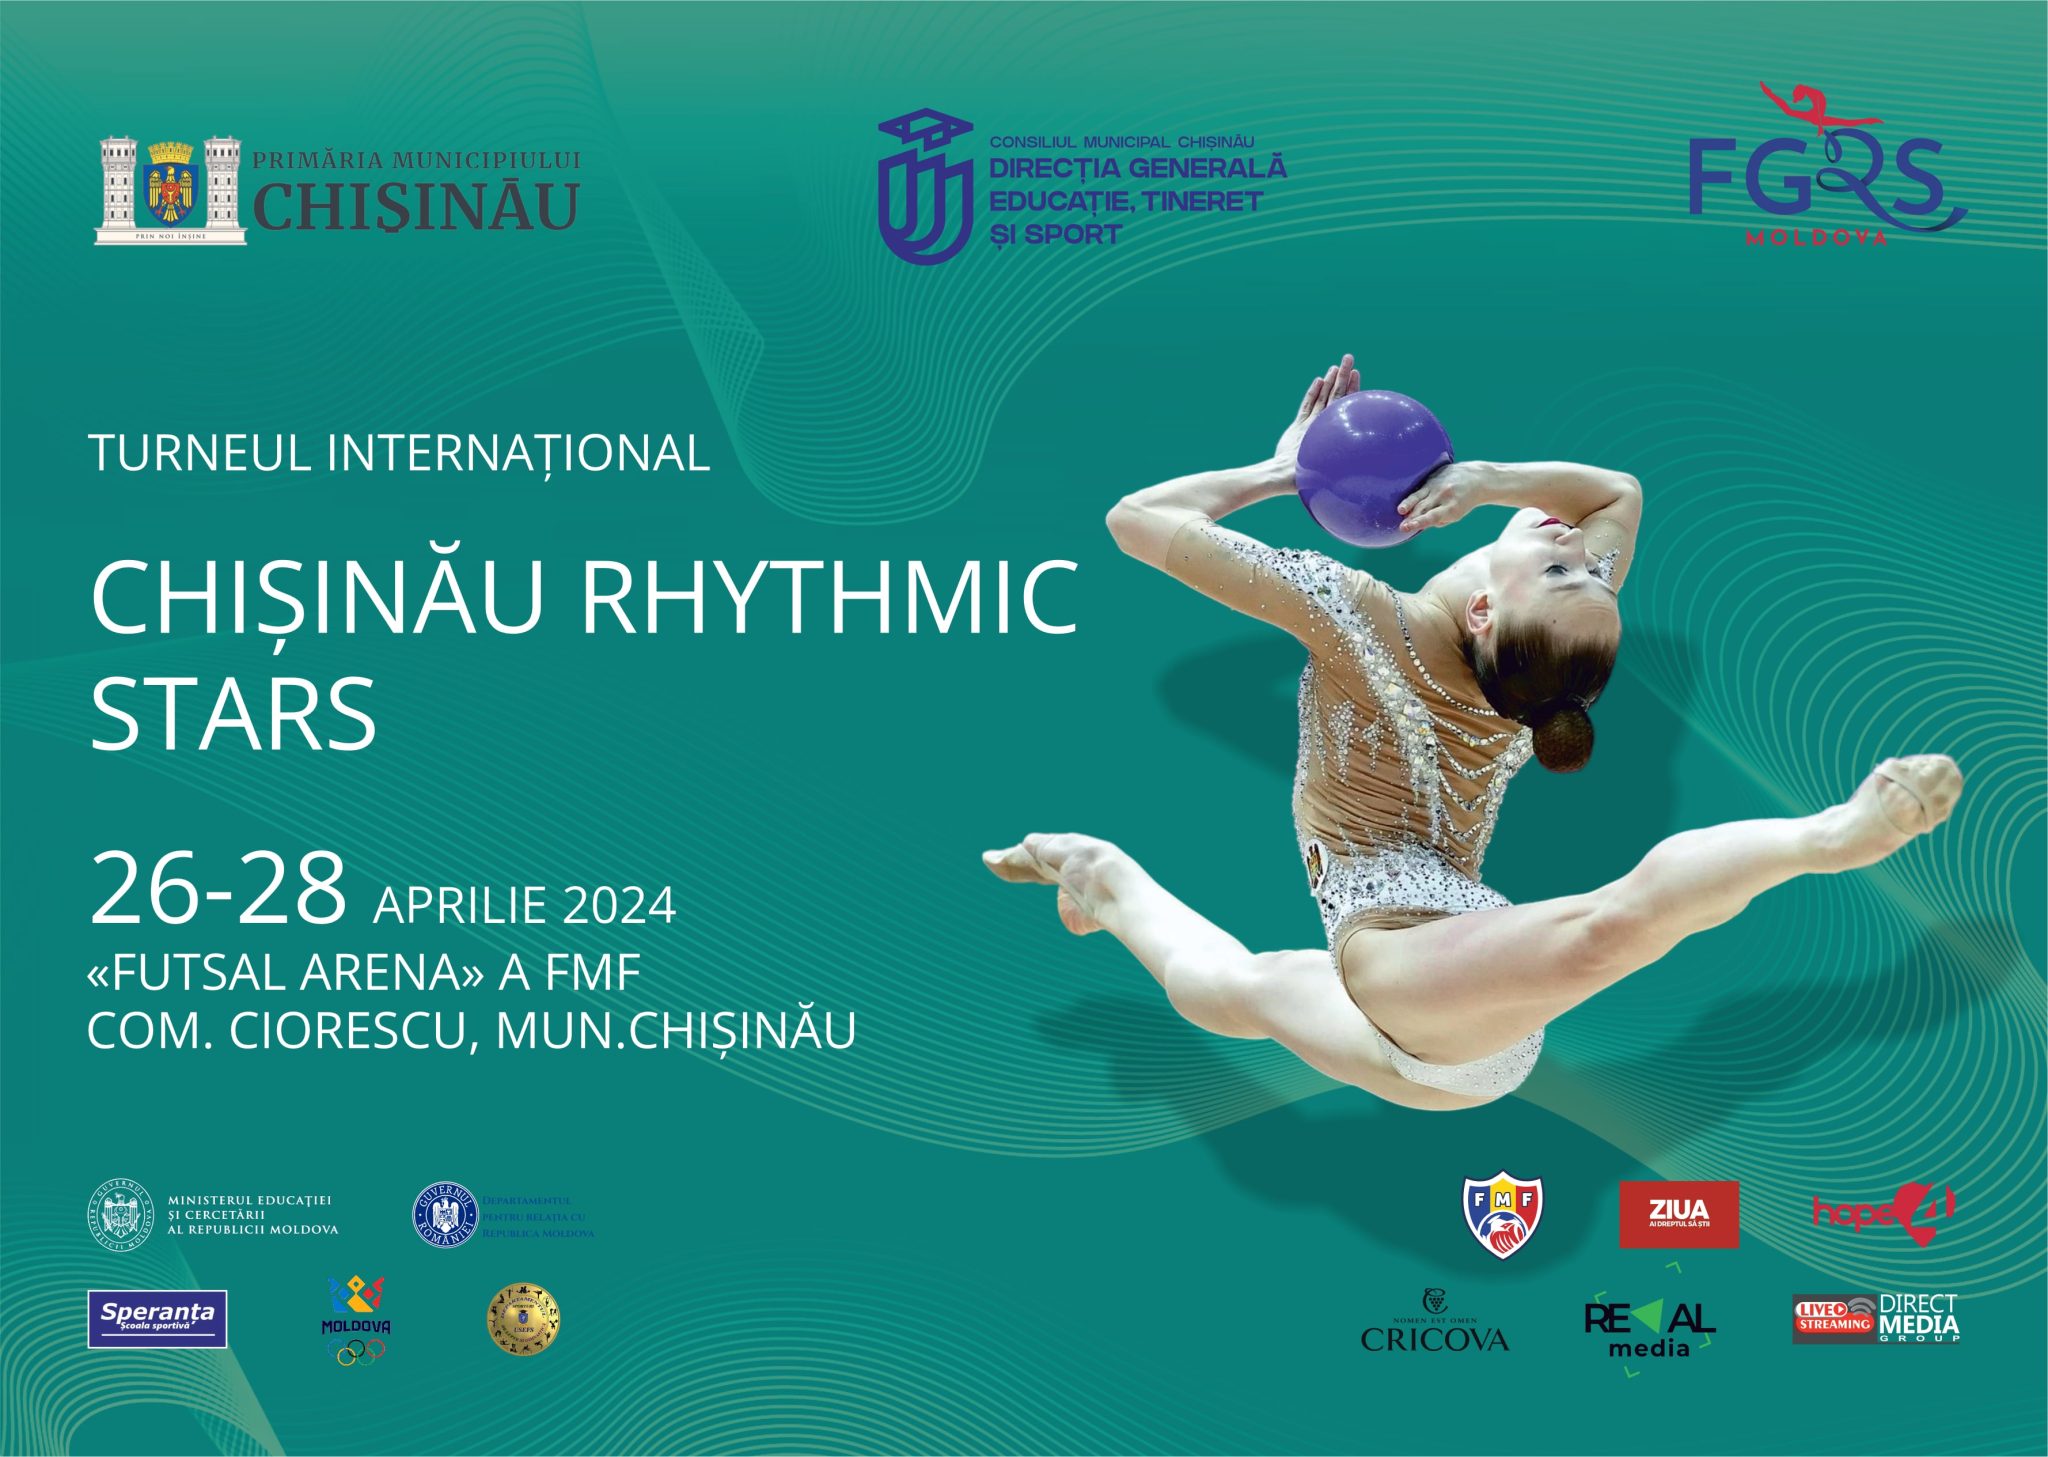 International Tournament “Chisinau Rhythmic Stars”: gymnasts from seven countries will participate